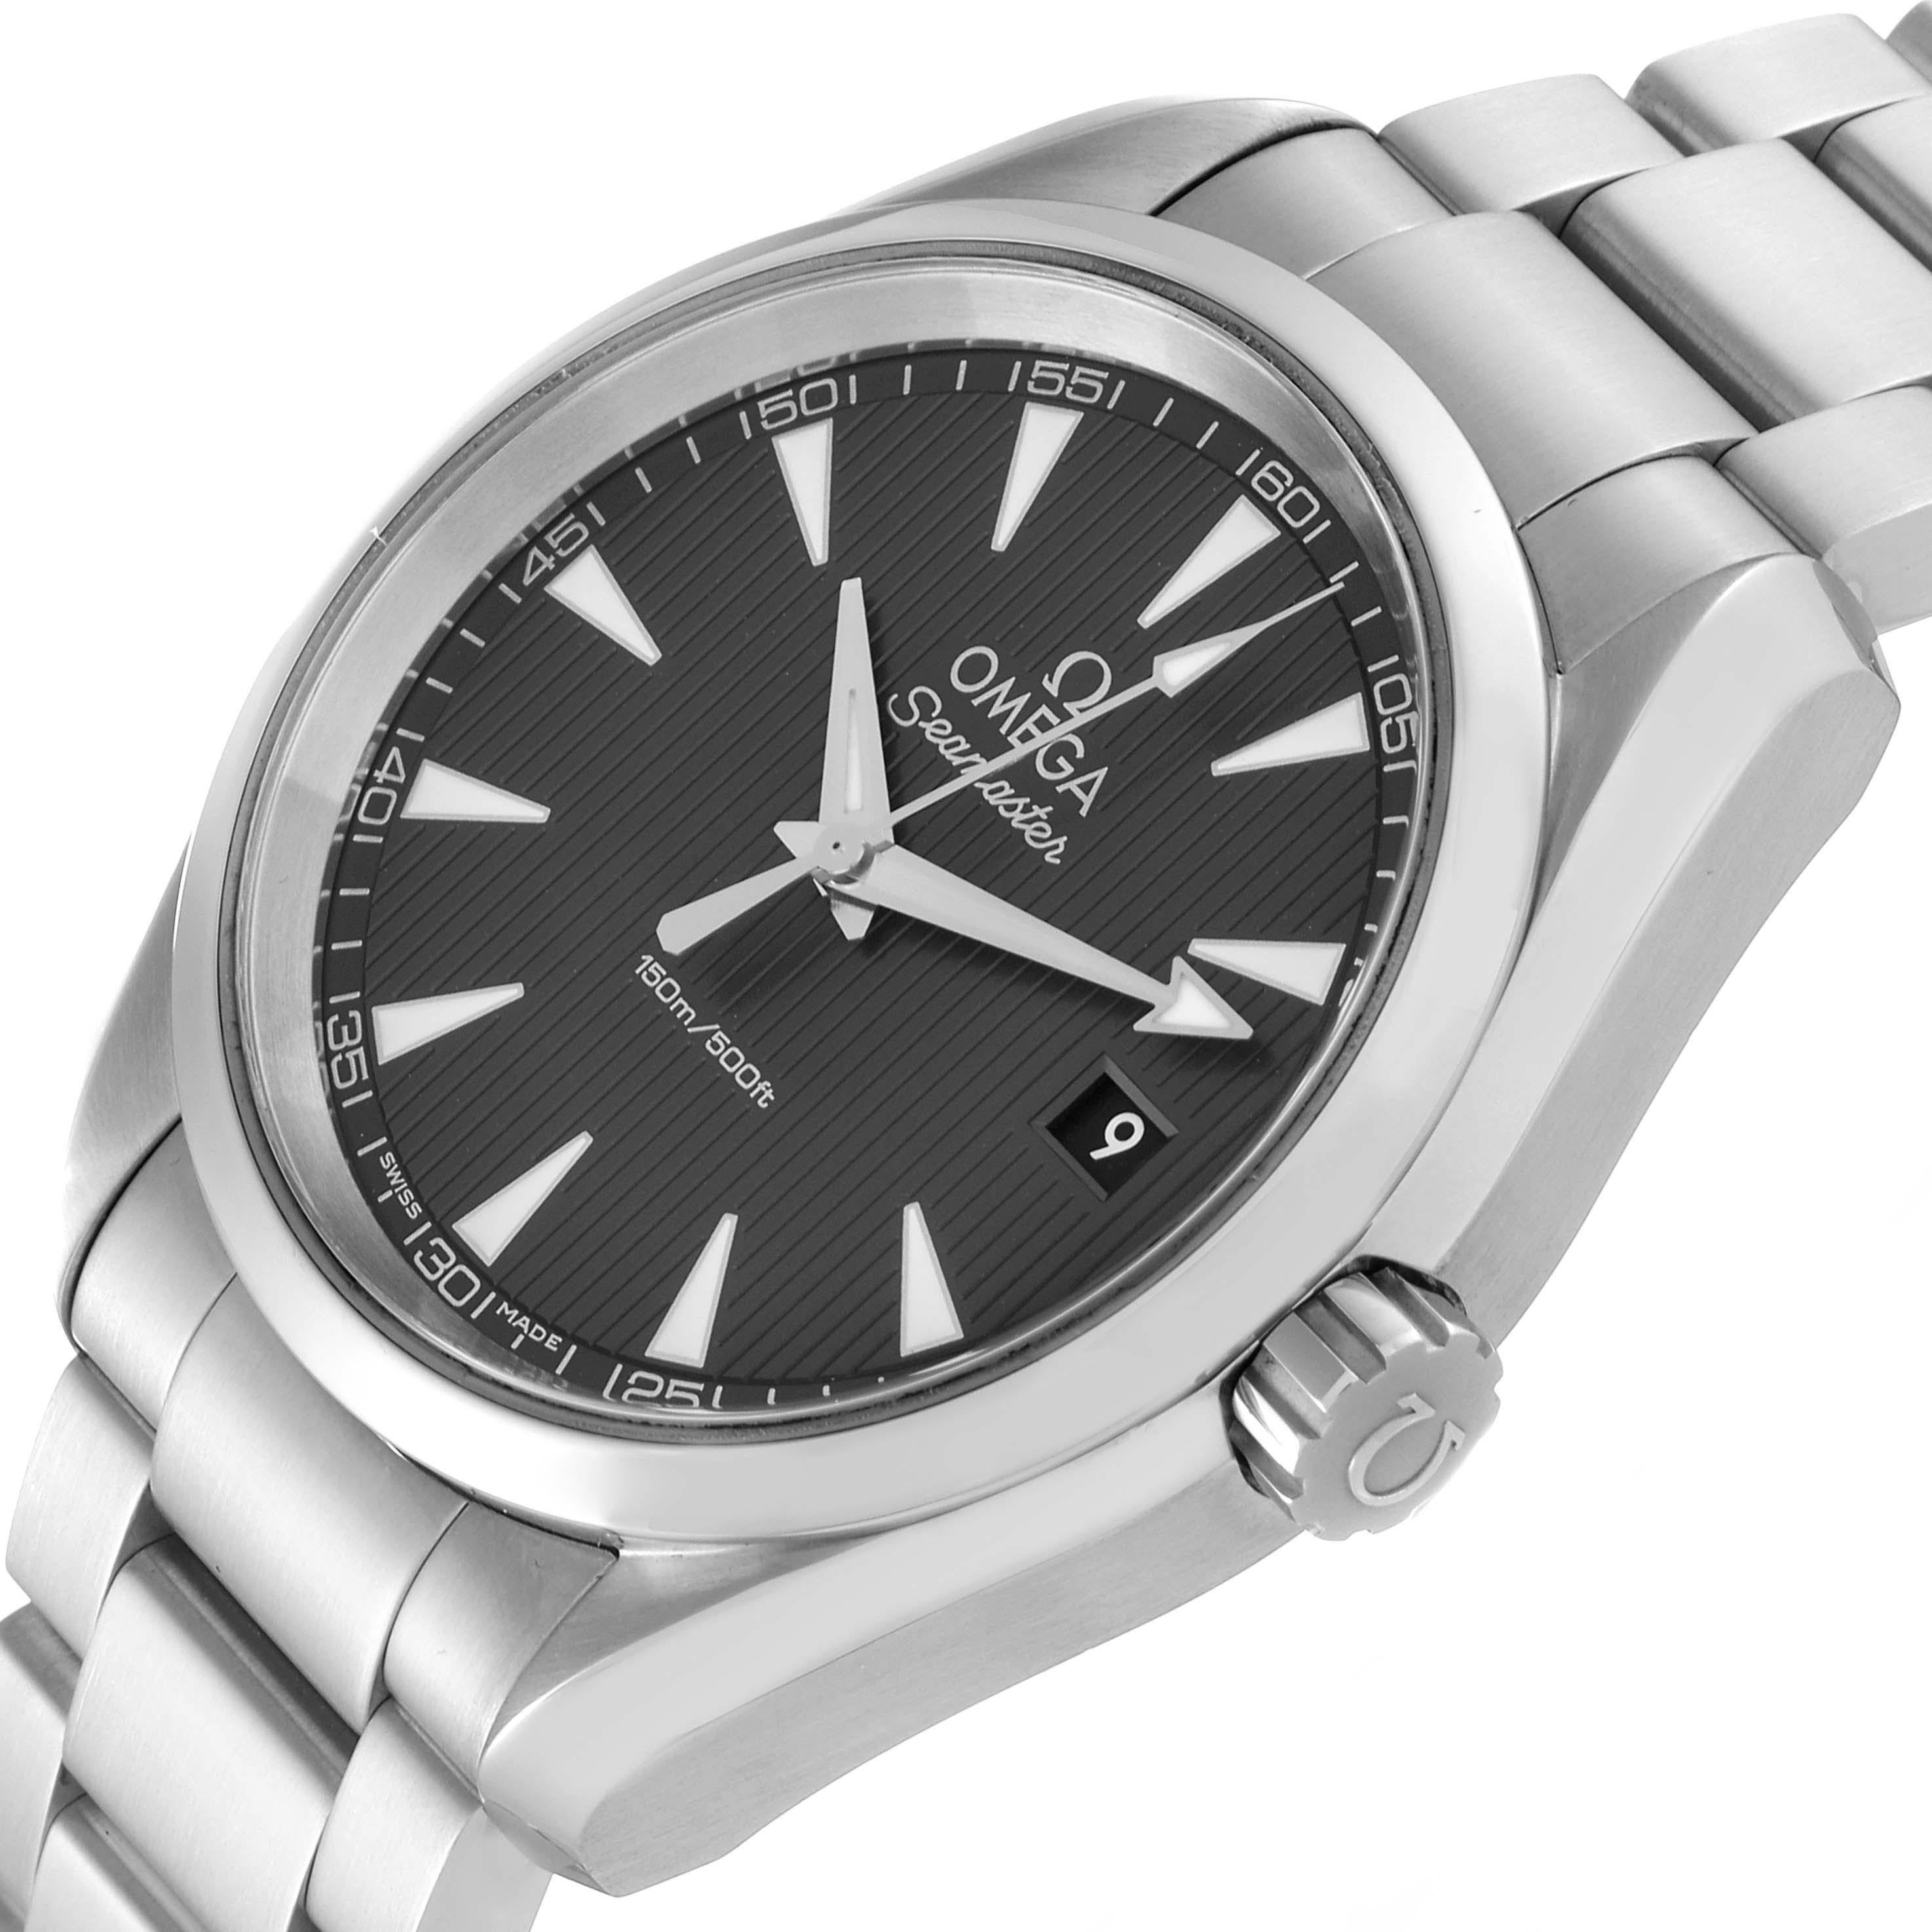 Omega Seamaster Aqua Terra Steel Mens Watch 231.10.39.60.06.001 Box Card. Quartz precision movement with rhodium-plated finish. Stainless steel round case 38.5 mm in diameter. Stainless steel smooth bezel. Scratch resistant sapphire crystal. Grey